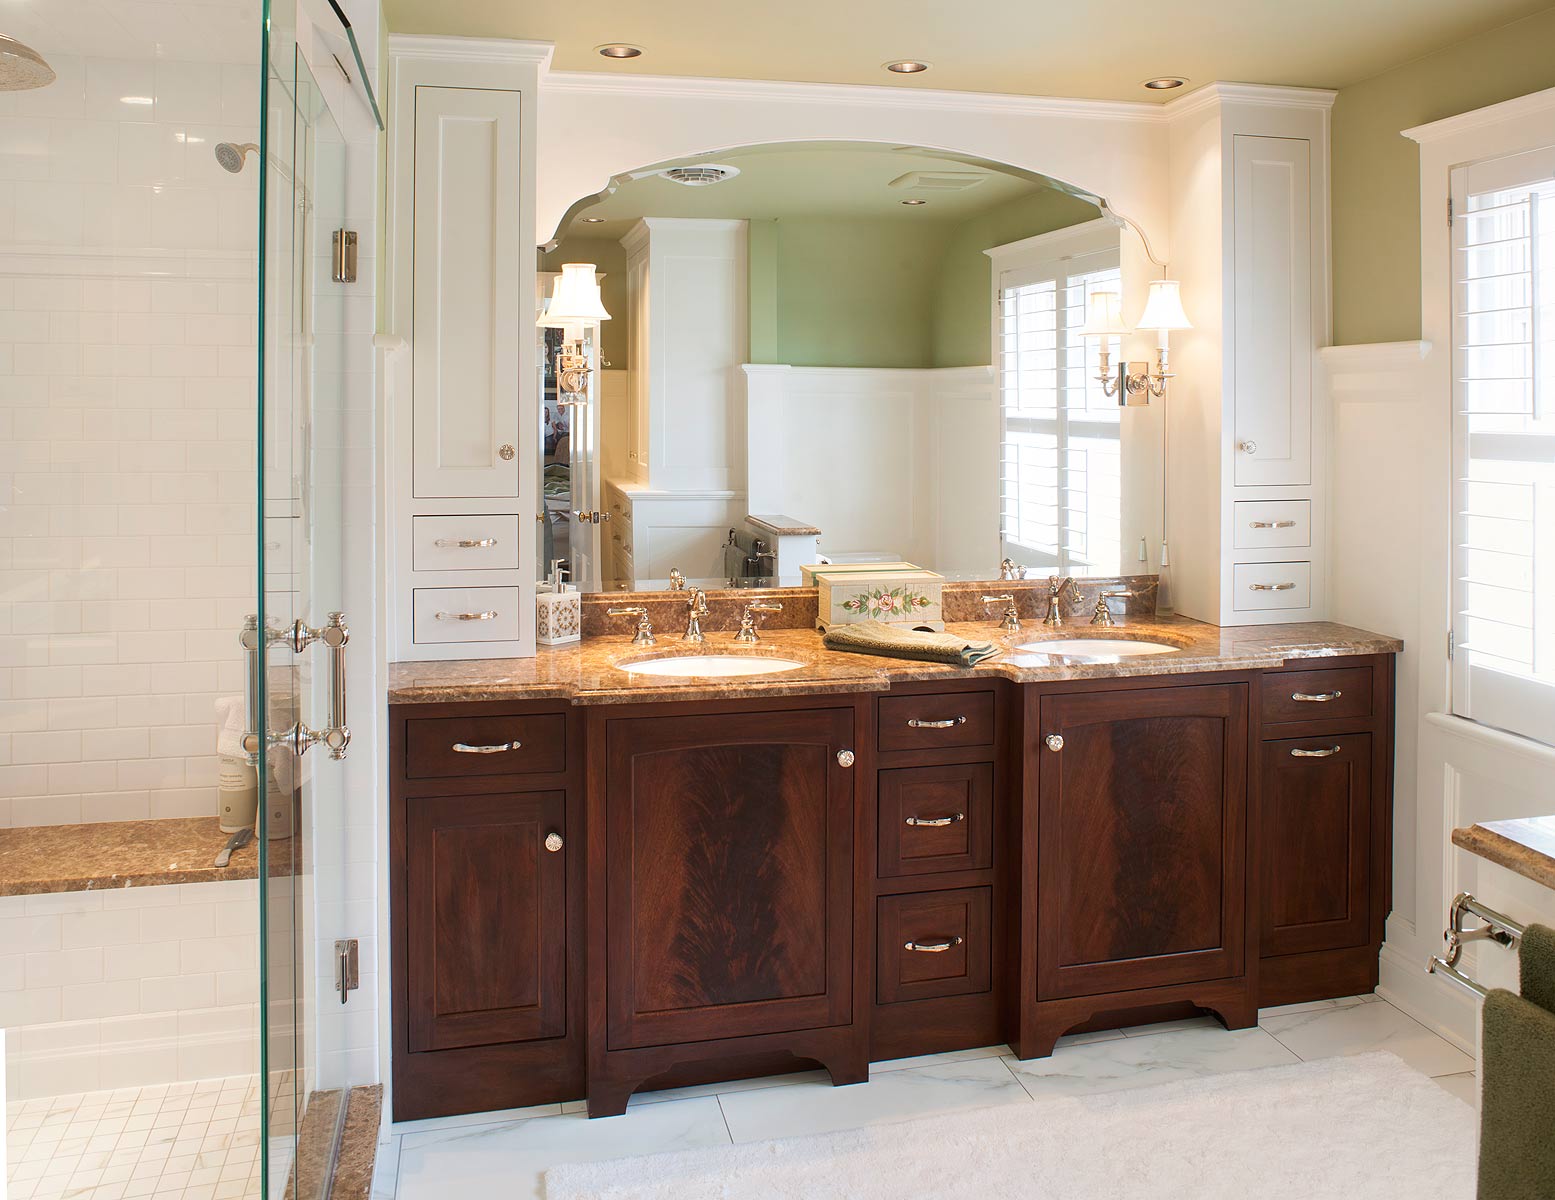 Bathroom Cabinet Wide Fabulous Bathroom Cabinet Ideas With Wide Mirror Plus Wall Lamps At Contemporary Bathroom Design Bathroom Bathroom Cabinet Ideas For Your Stylish Storage Solution